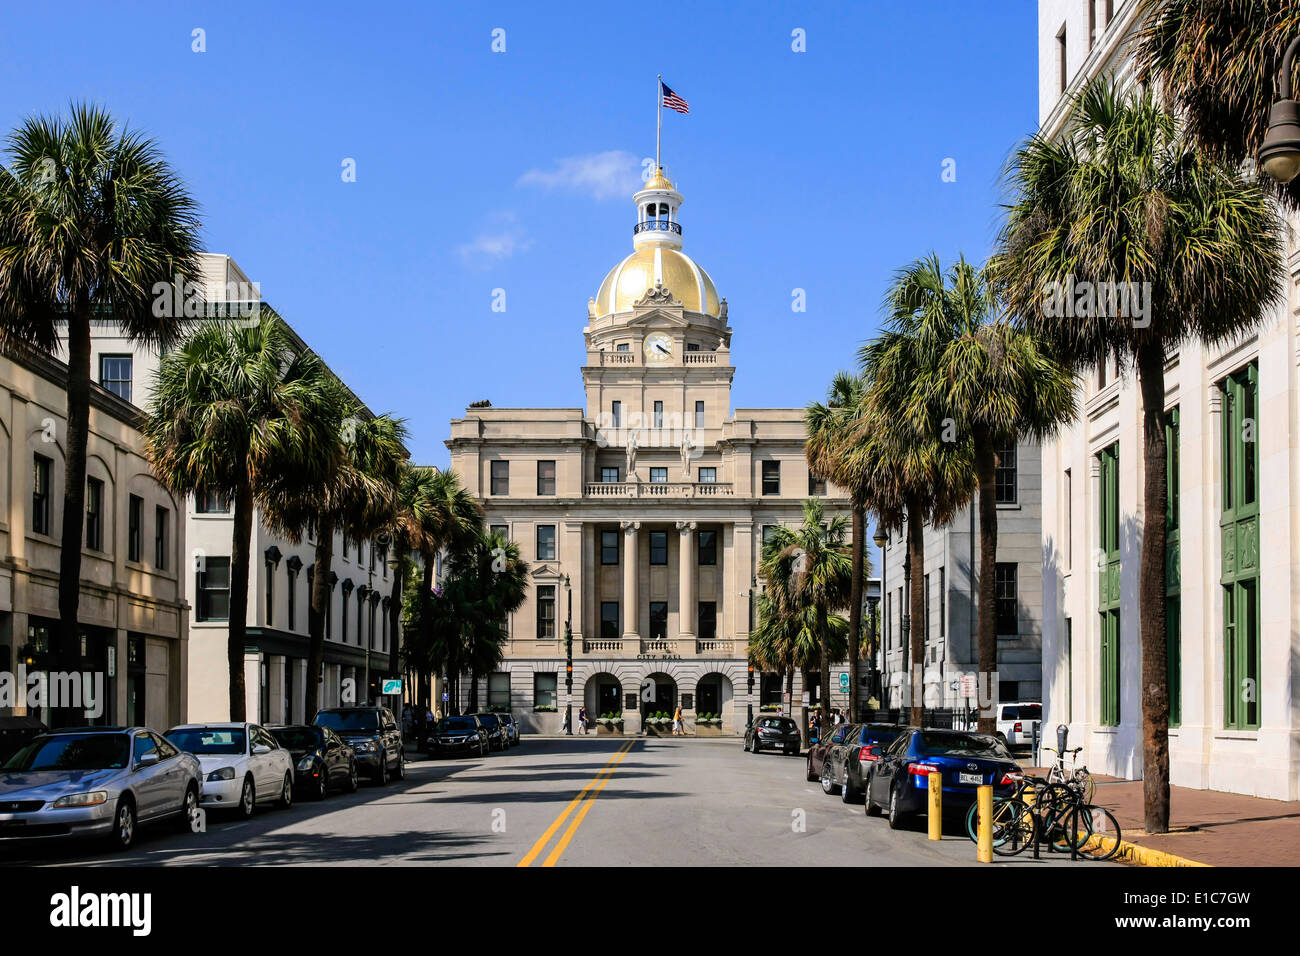 The gold domed City Hall building in Savannah Georgia Stock Photo